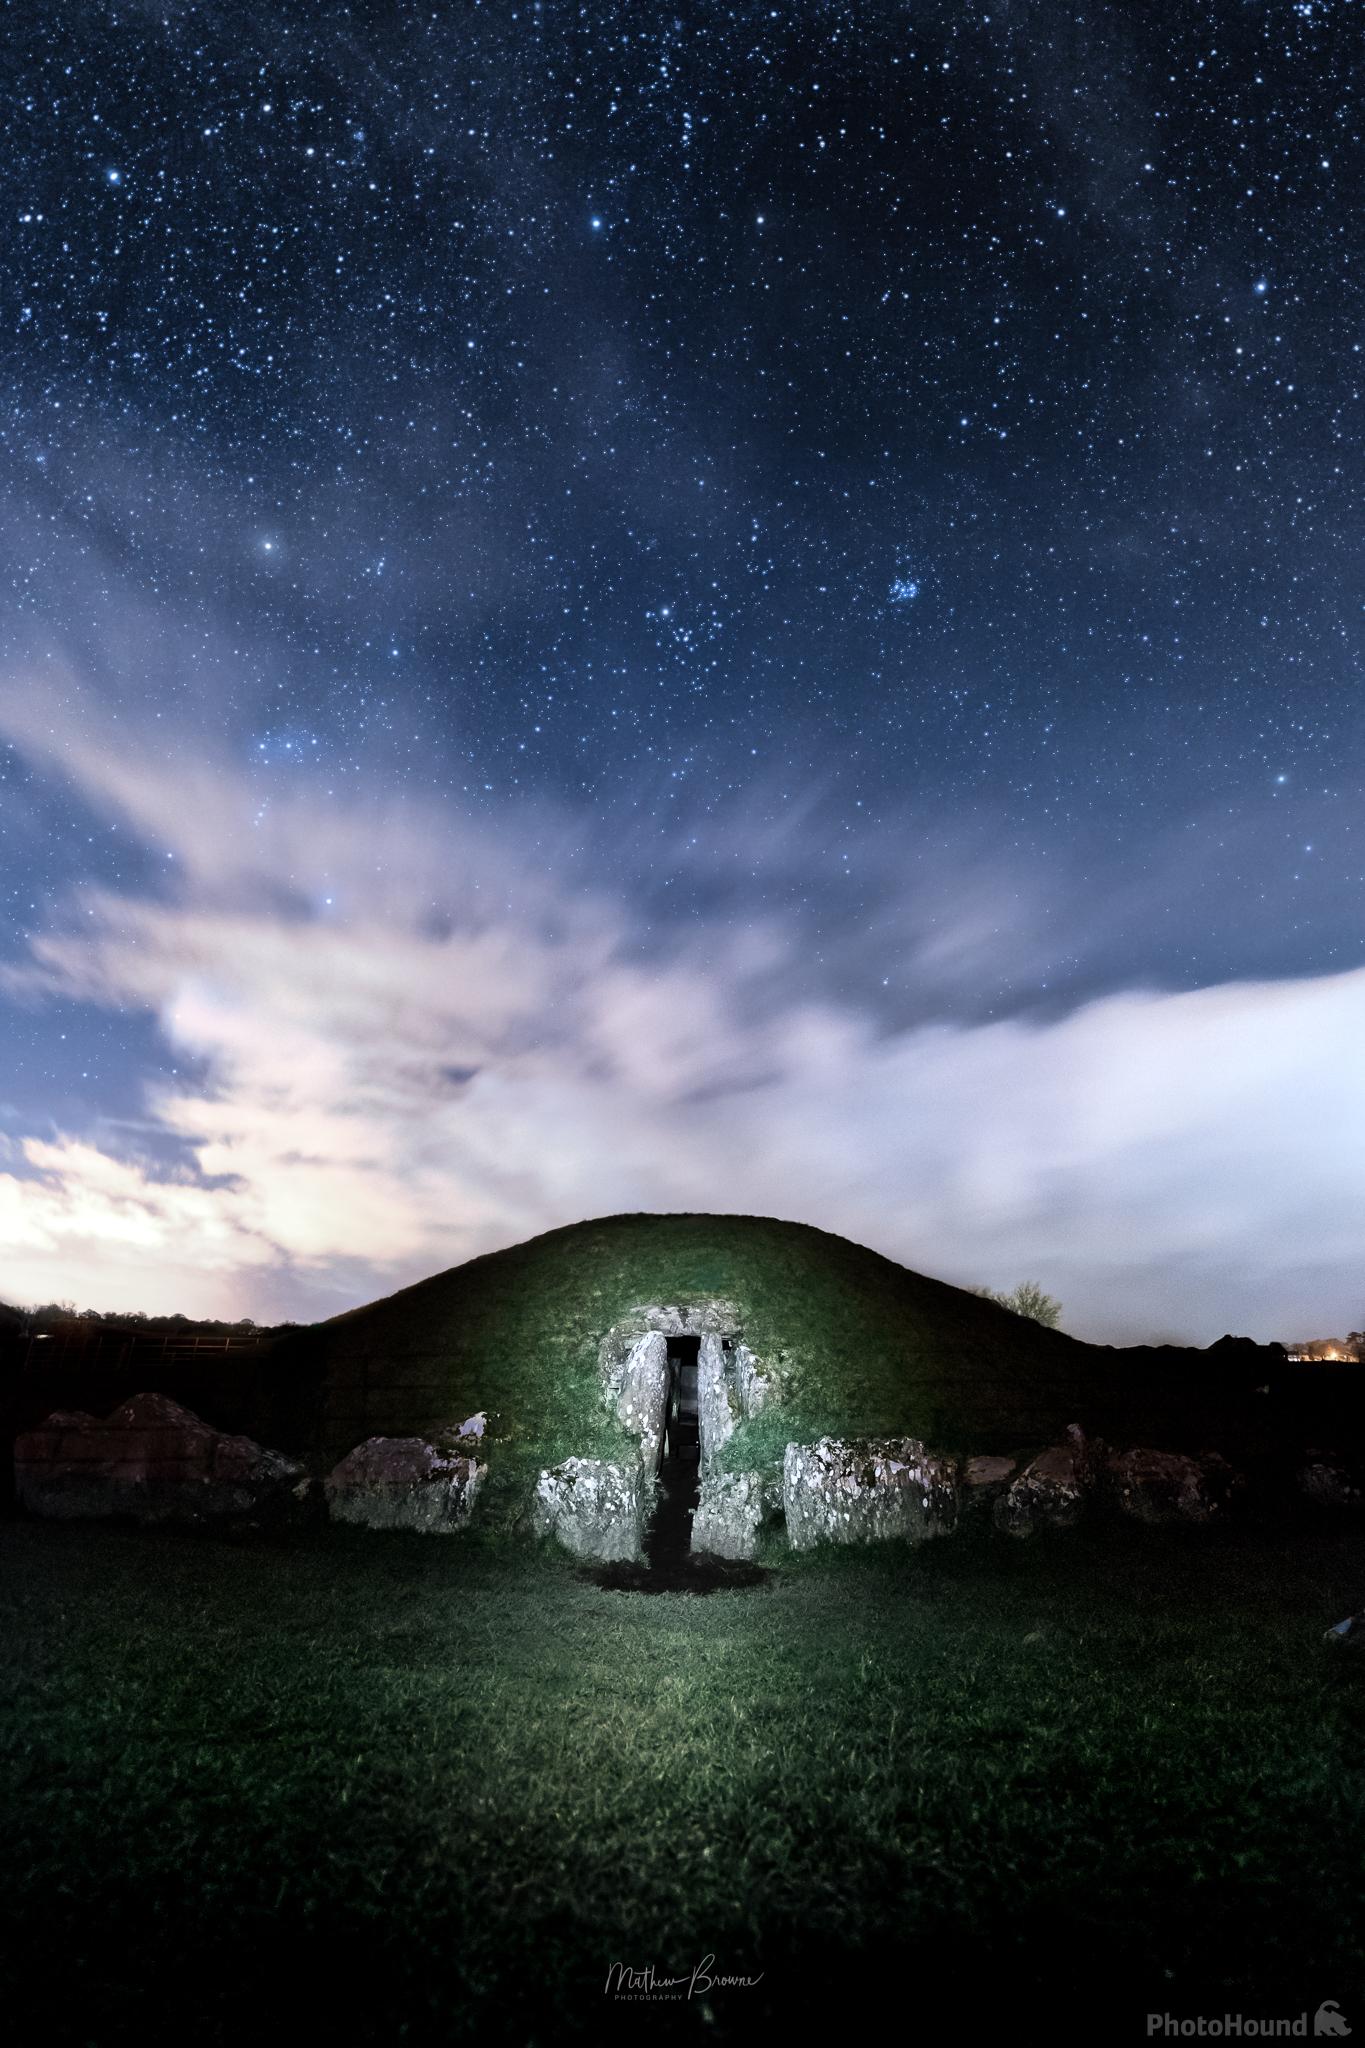 Image of Bryn Celli Ddu Burial Chamber by Mathew Browne